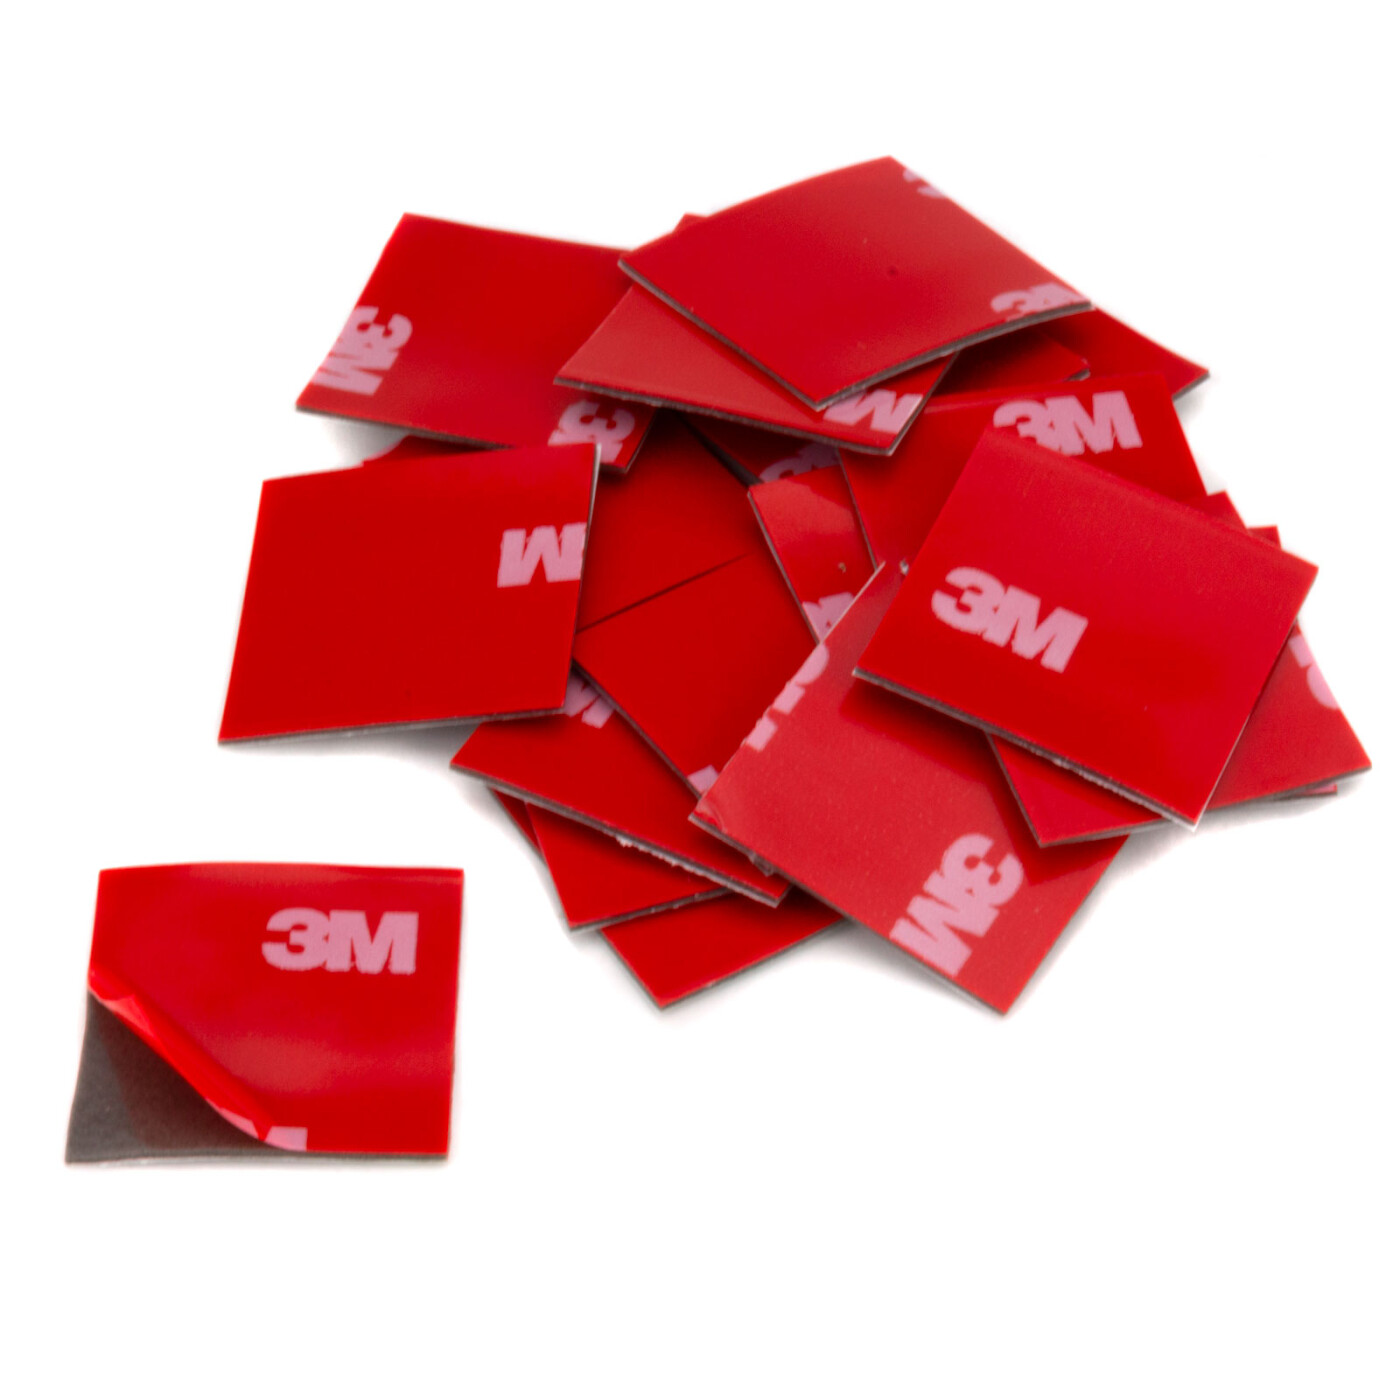 3M 4229 double-sided adhesive pads 25x25mm